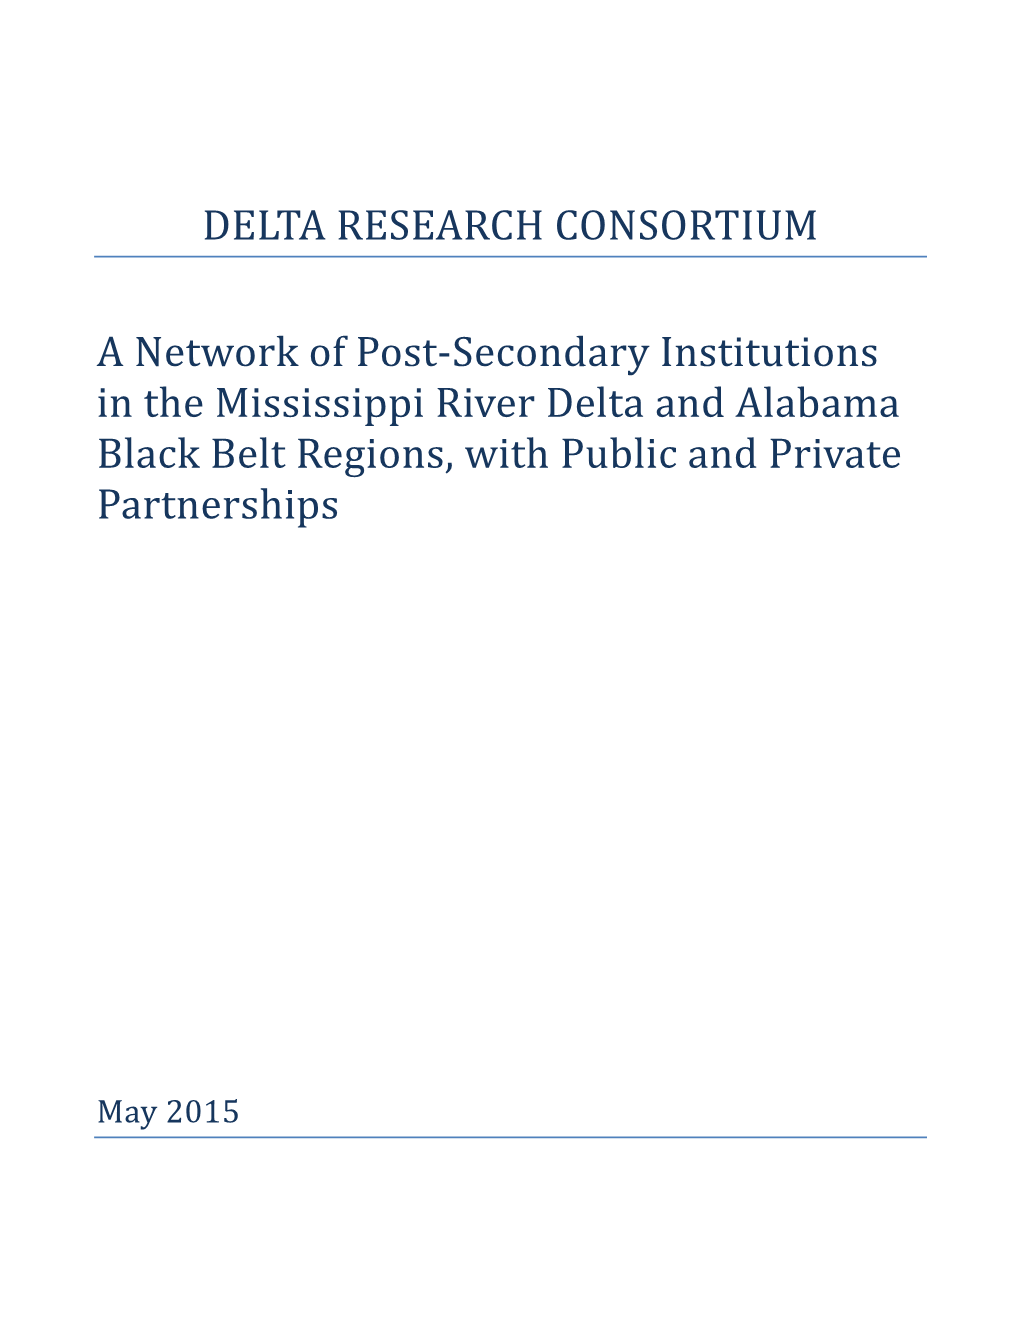 DELTA RESEARCH CONSORTIUM a Network of Post-Secondary